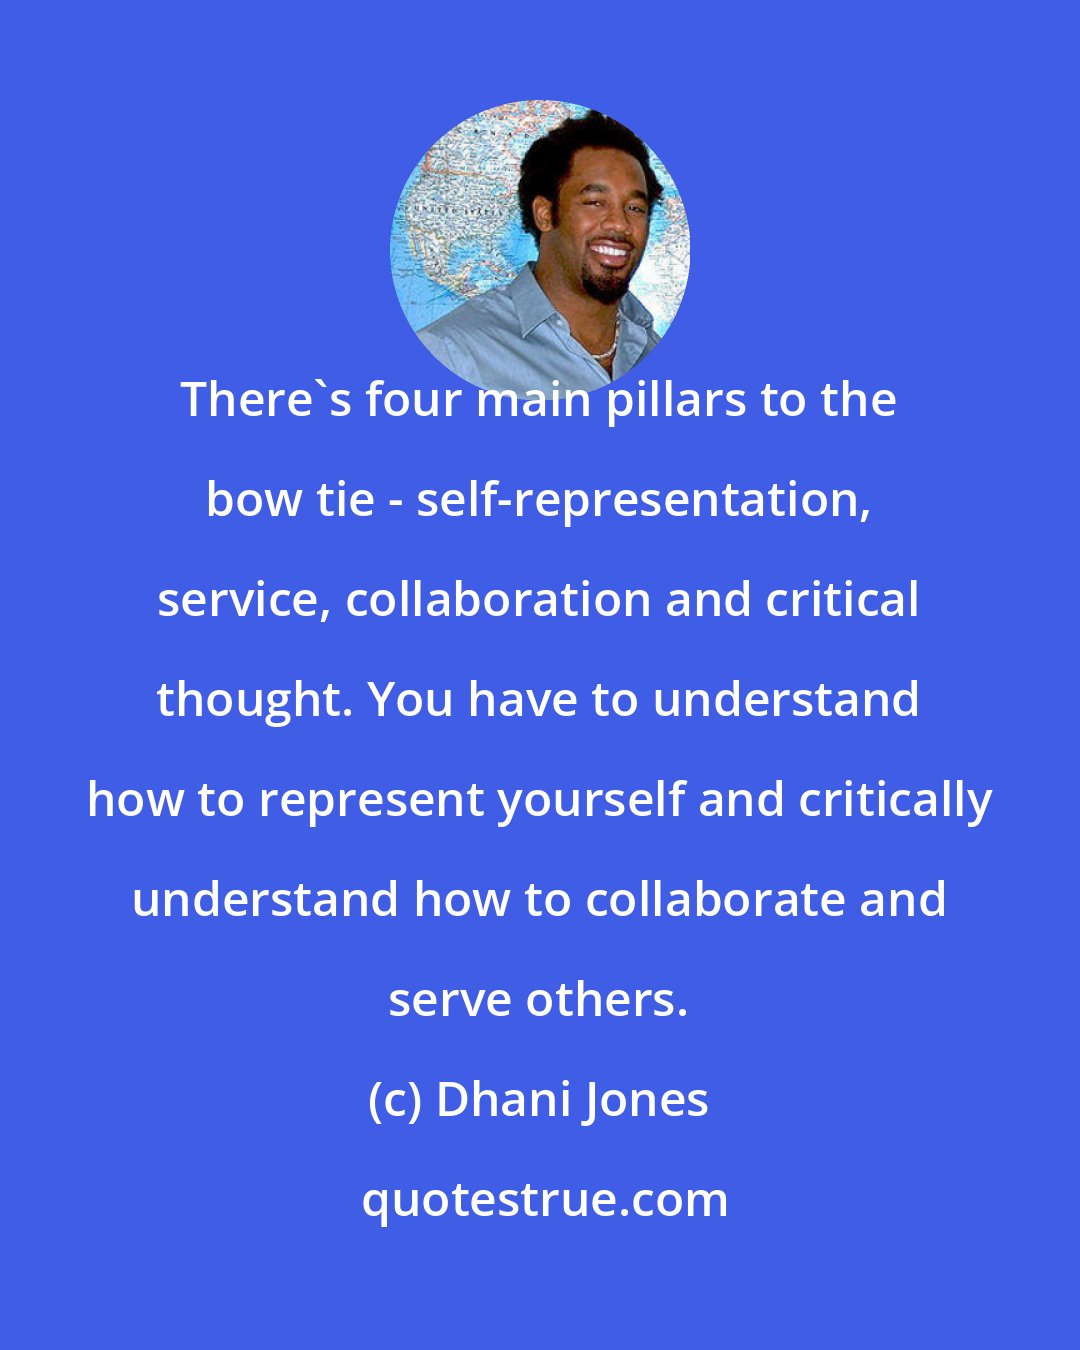 Dhani Jones: There's four main pillars to the bow tie - self-representation, service, collaboration and critical thought. You have to understand how to represent yourself and critically understand how to collaborate and serve others.